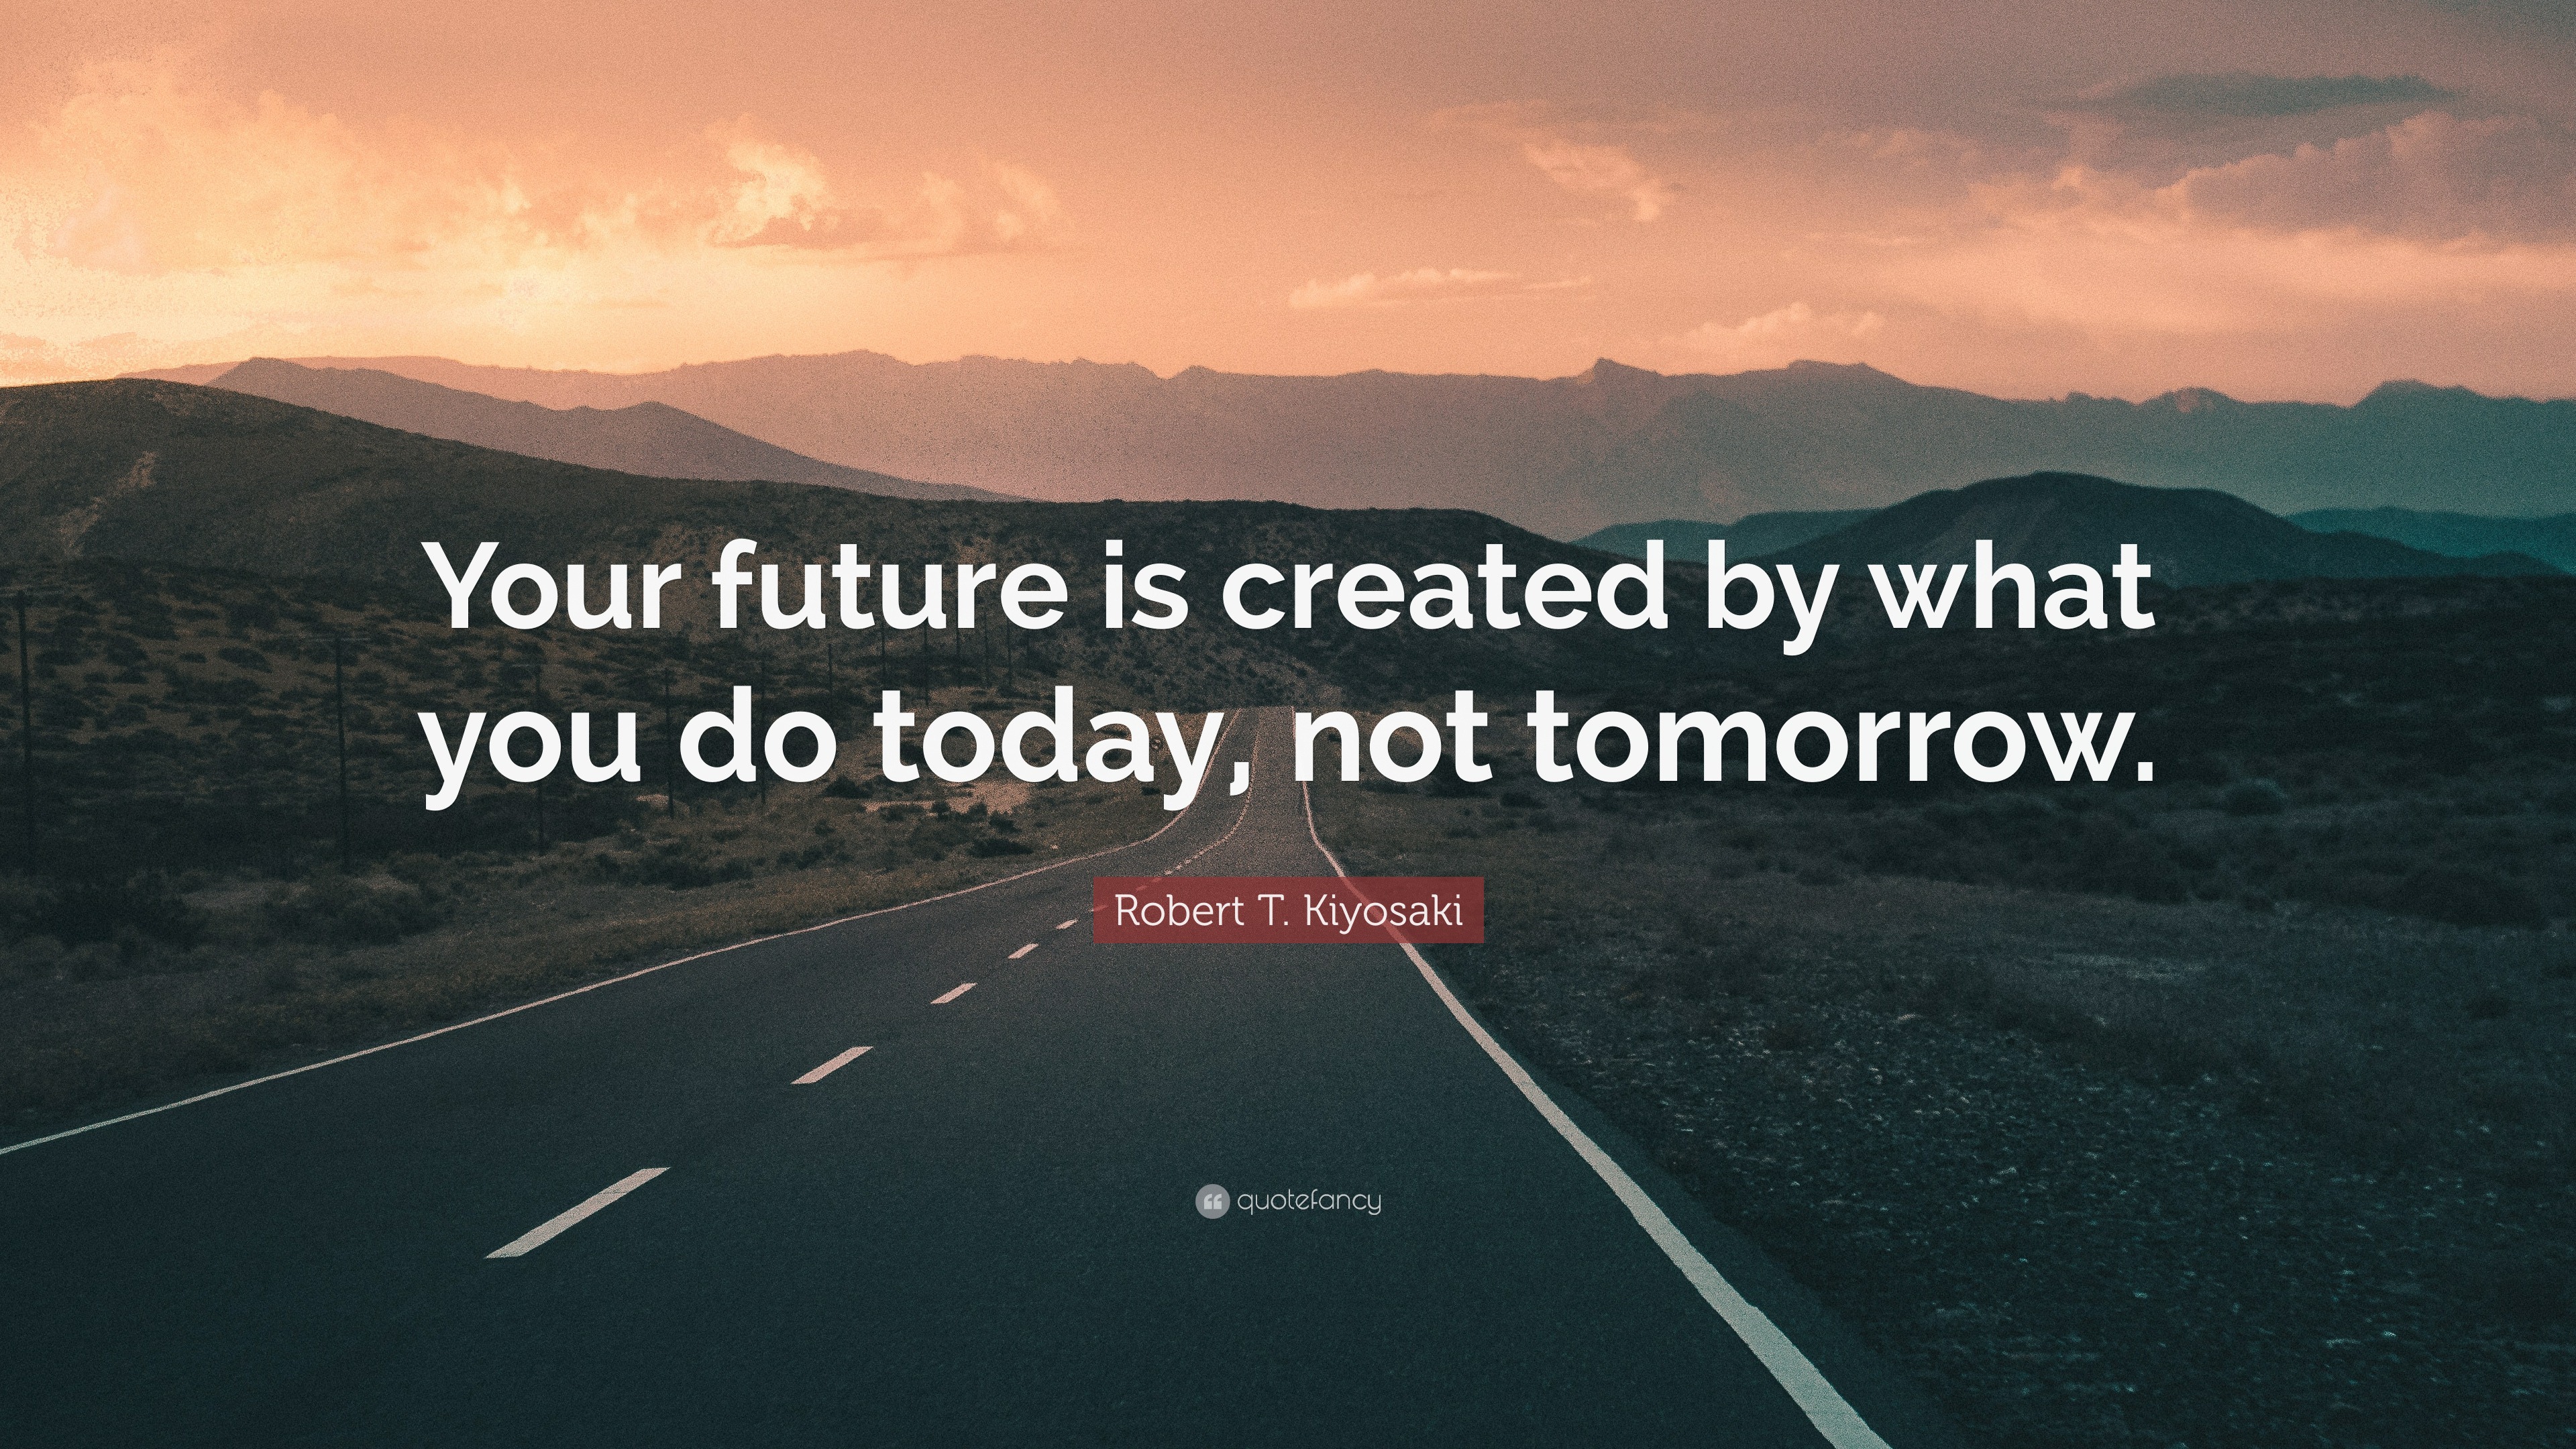 Robert T Kiyosaki Quote "Your Future Is Created By What You Do Today 